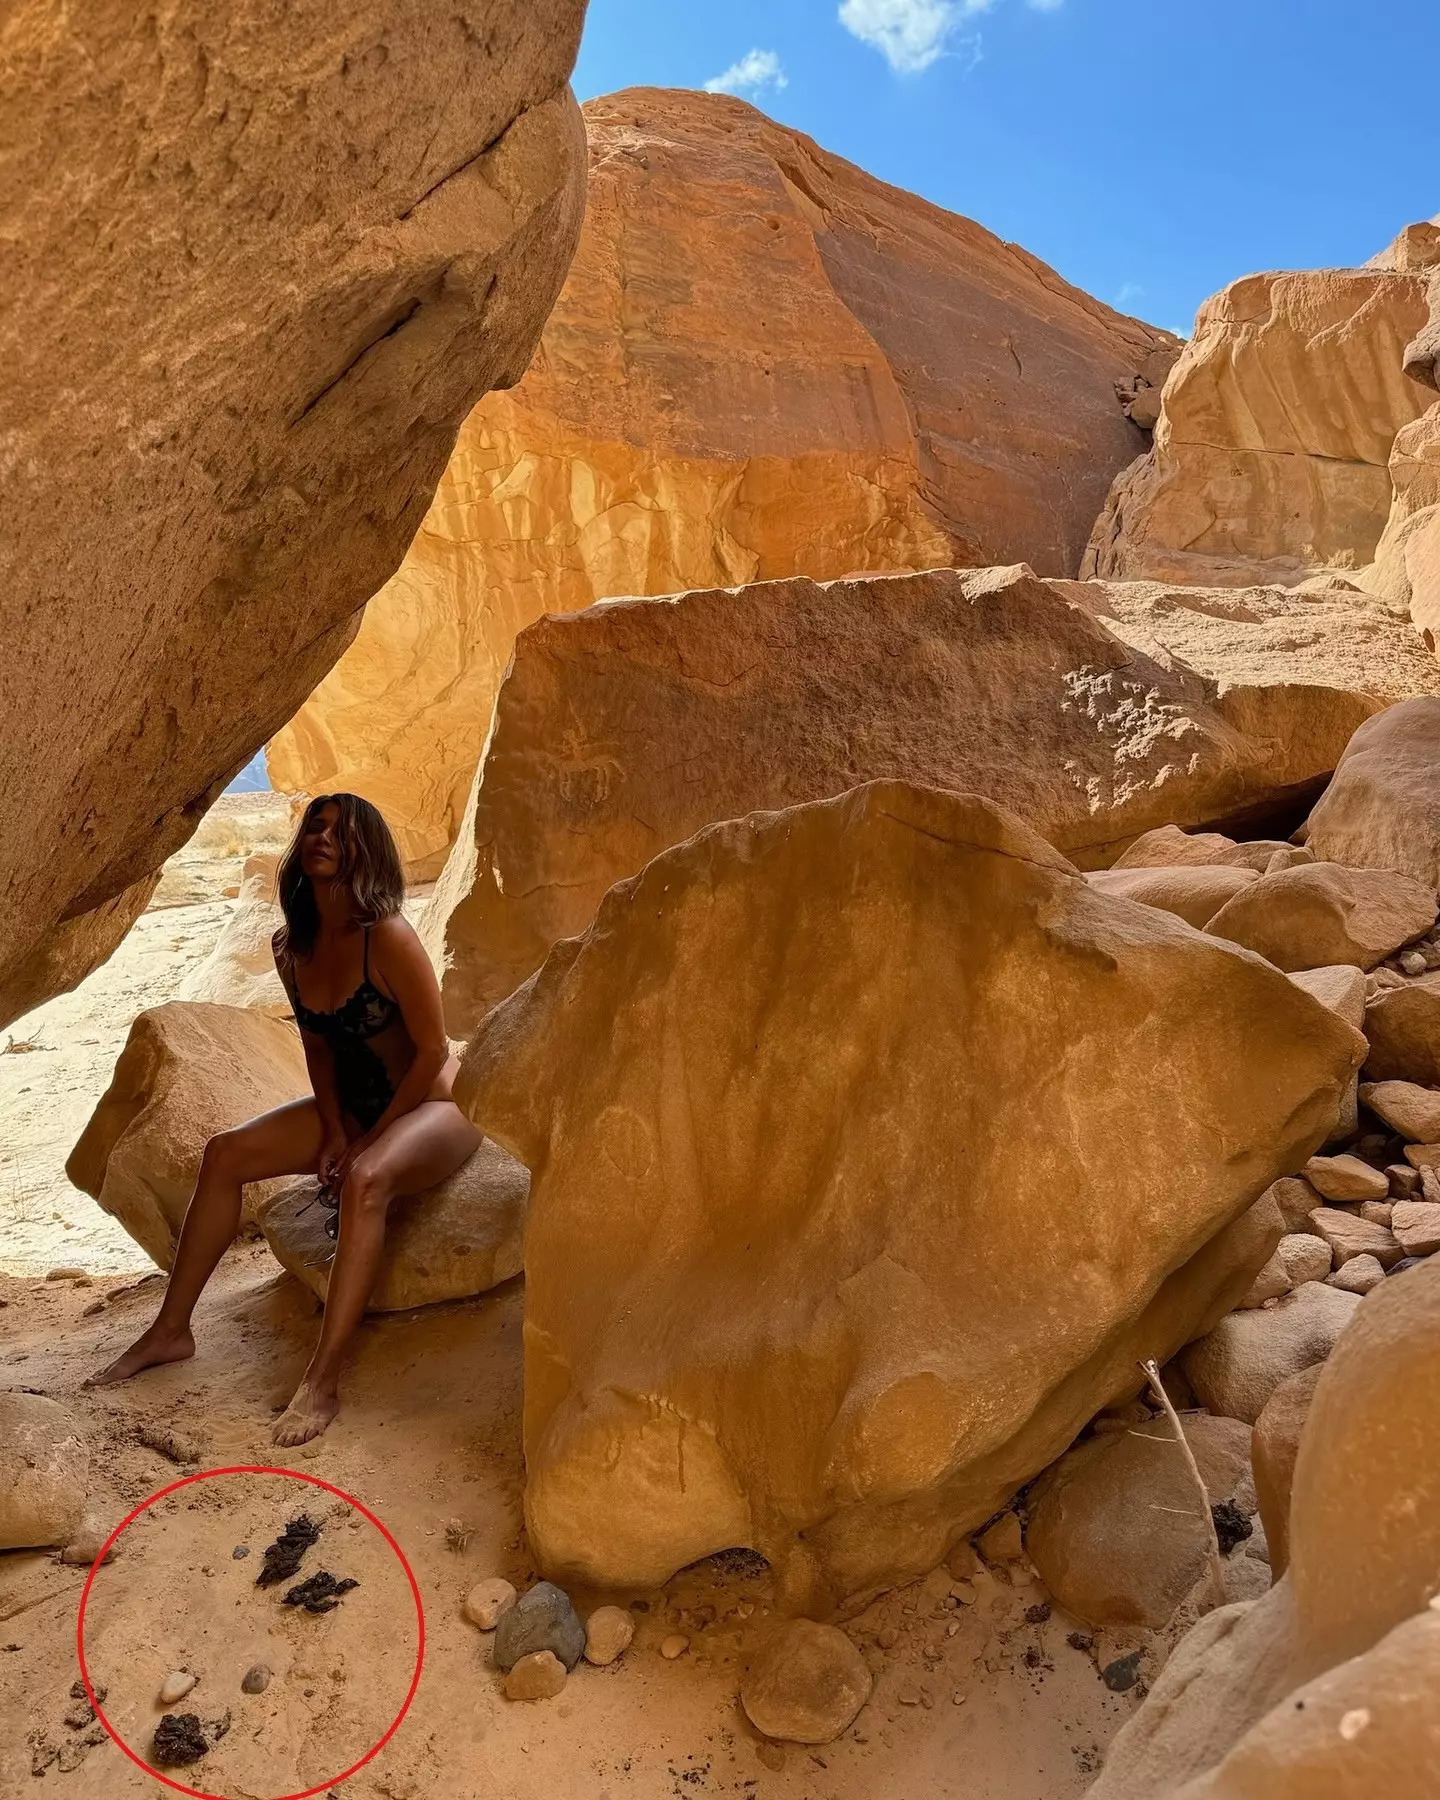 People pointed out the apparent poop in Halle Berry's photo.